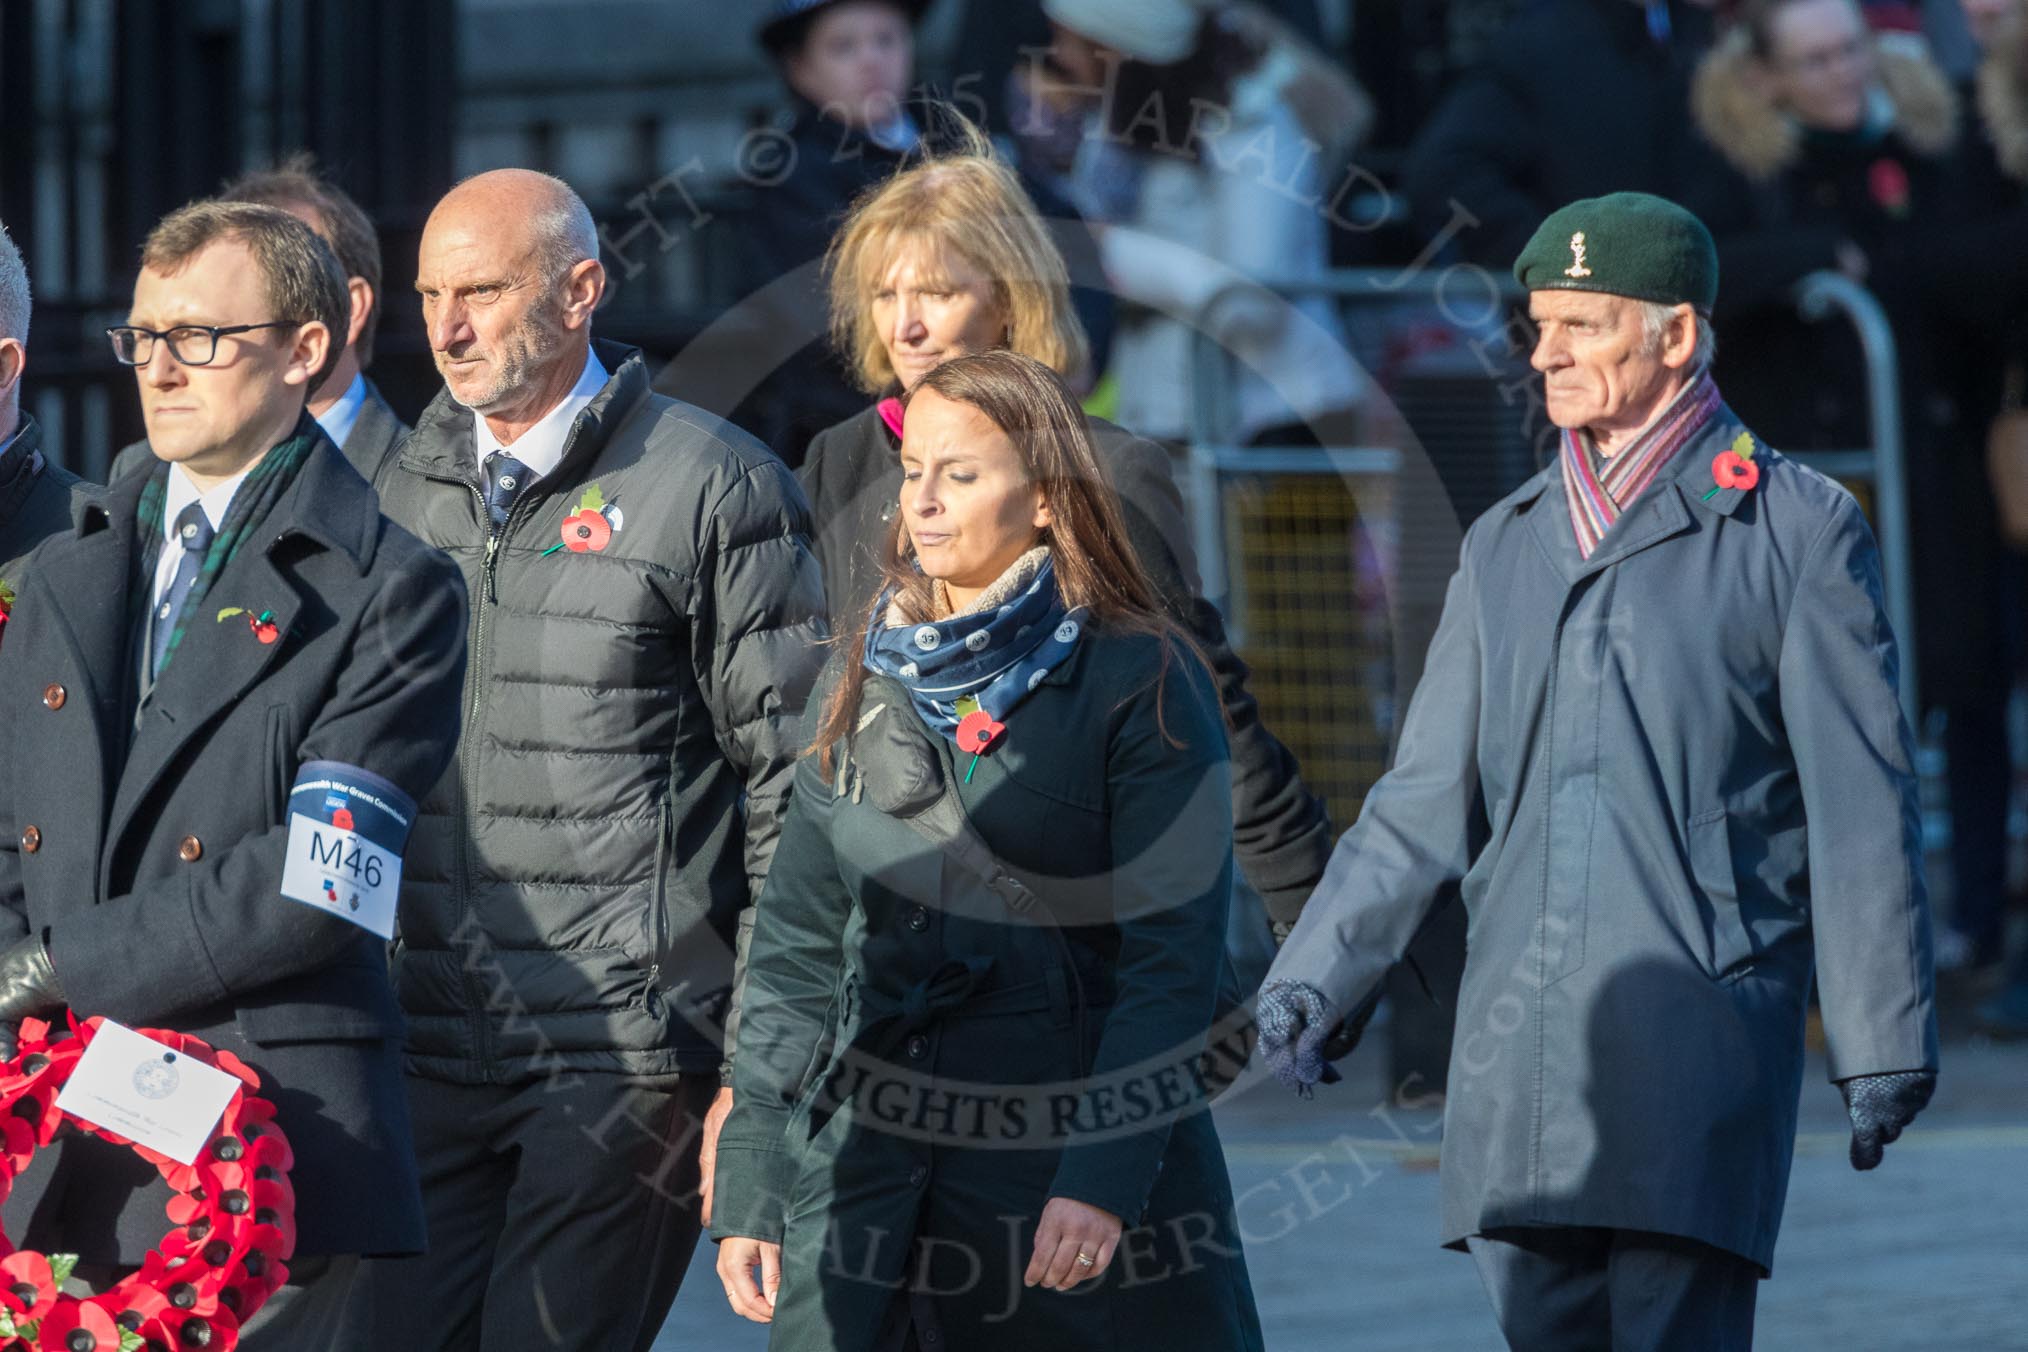 March Past, Remembrance Sunday at the Cenotaph 2016: M46 Commonwealth War Graves Commission.
Cenotaph, Whitehall, London SW1,
London,
Greater London,
United Kingdom,
on 13 November 2016 at 13:20, image #3004